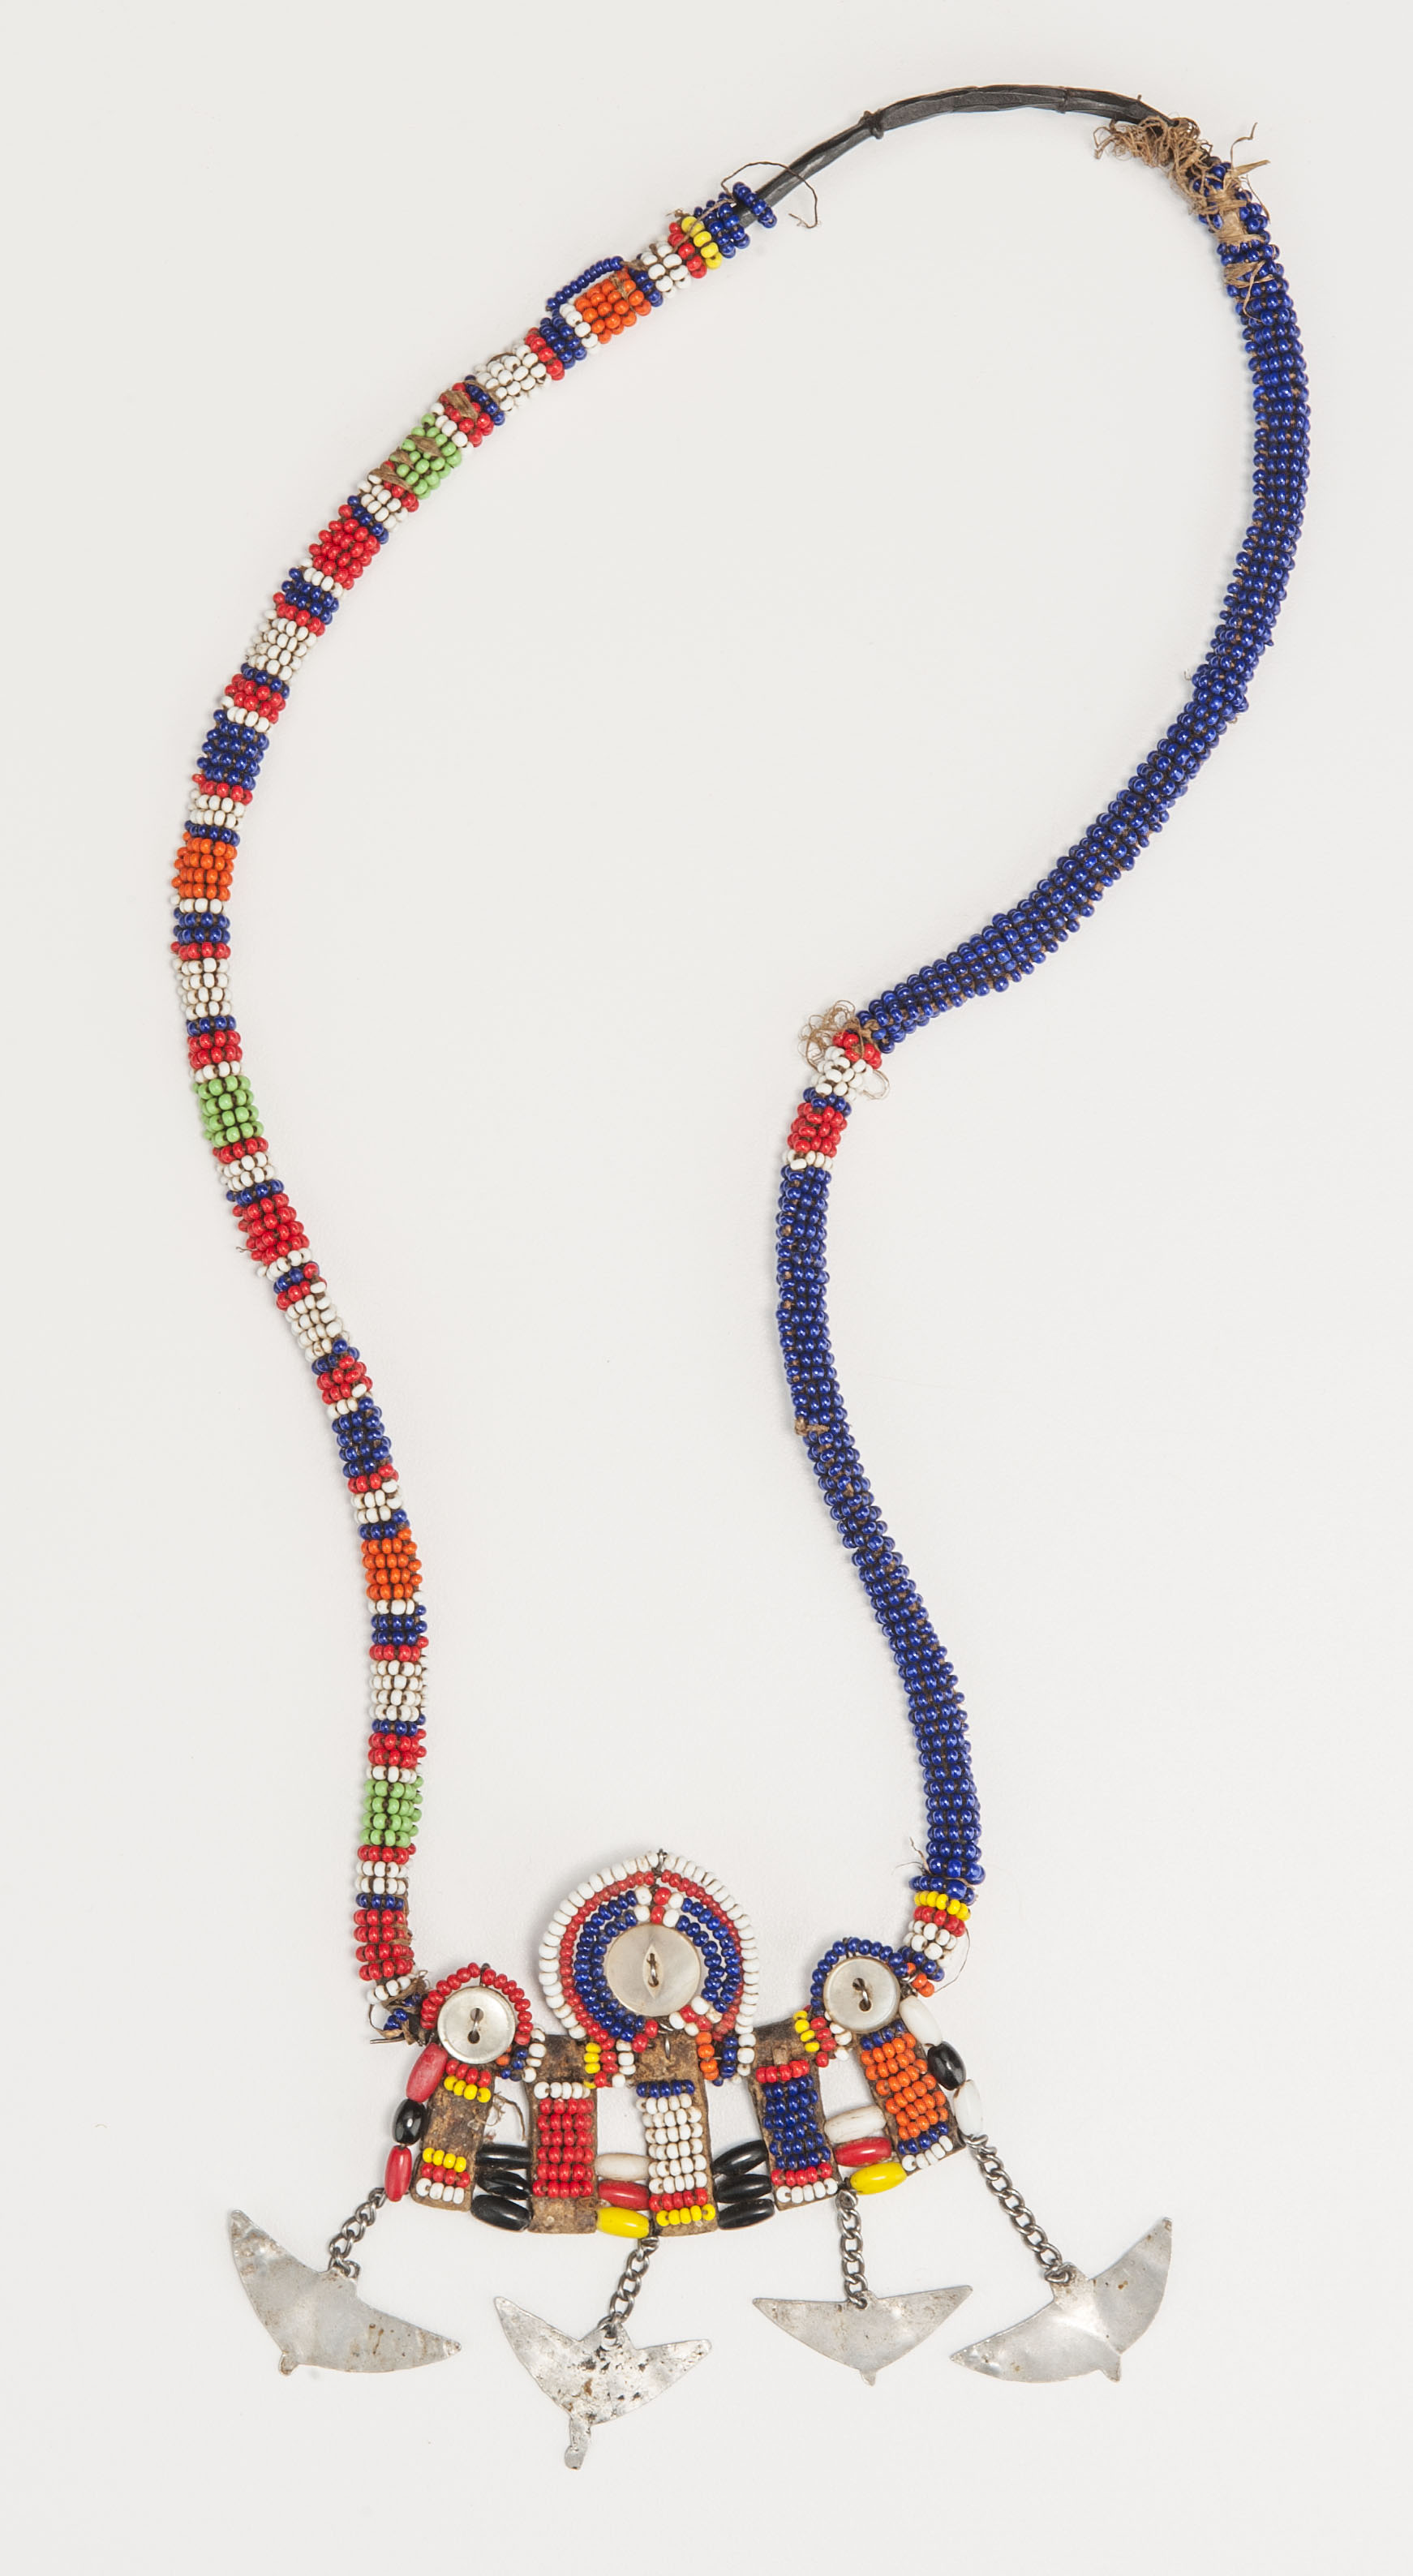 Collier d'homme by Artiste Inconnu - collected in Wamba in the 1970s 